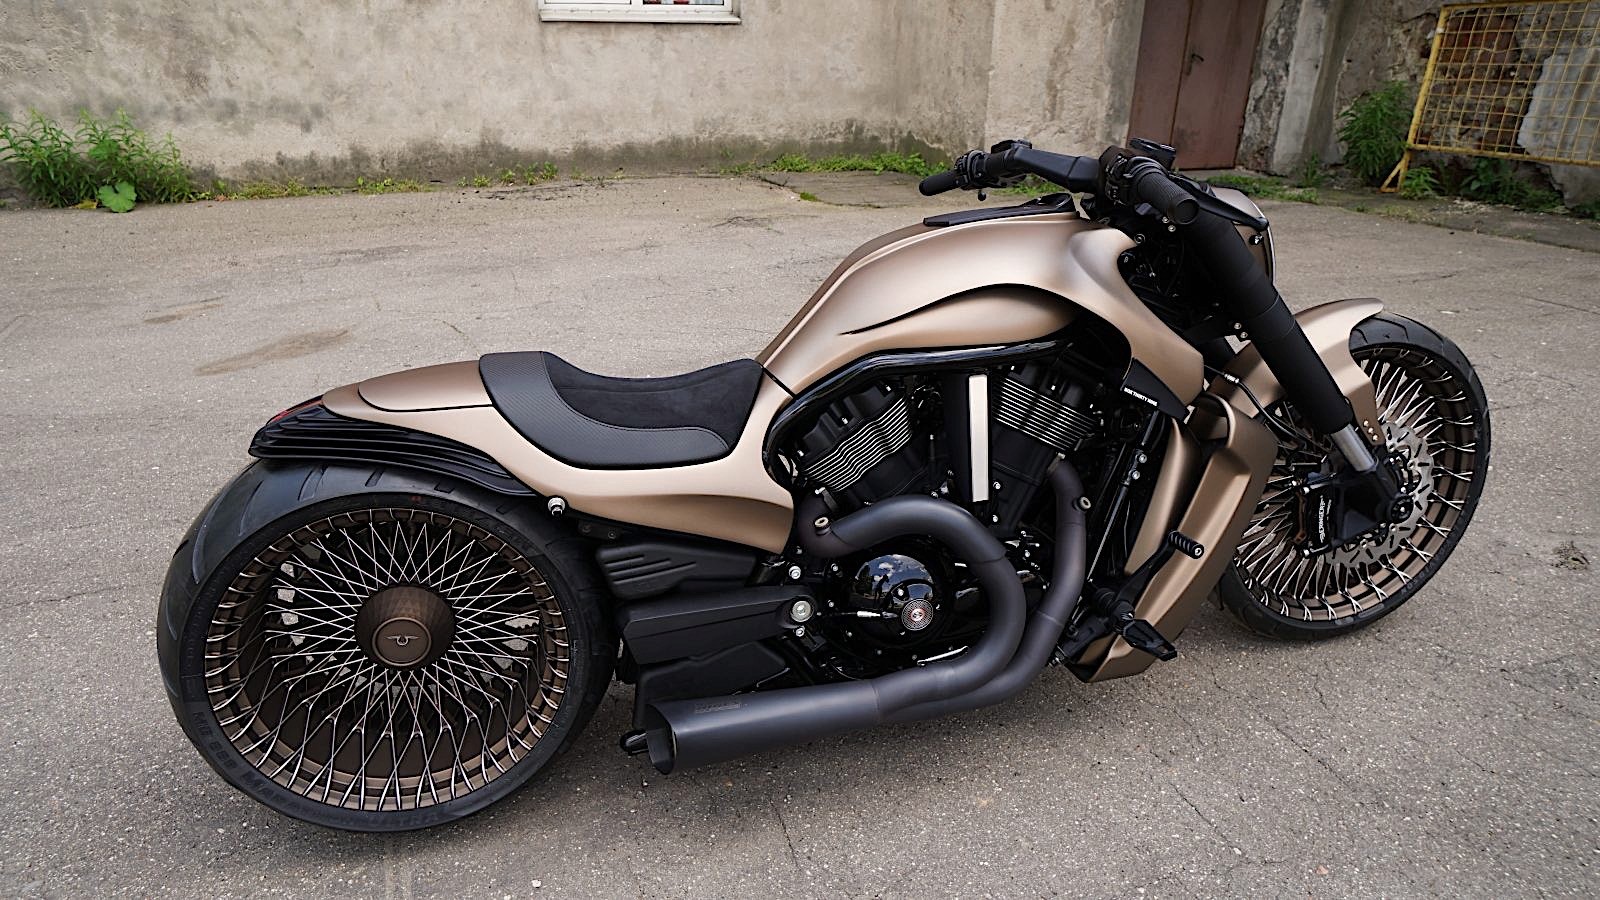 2014 Harley Davidson V Rod Uses Special Paint And Wire Wheels To Stand Out Autoevolution